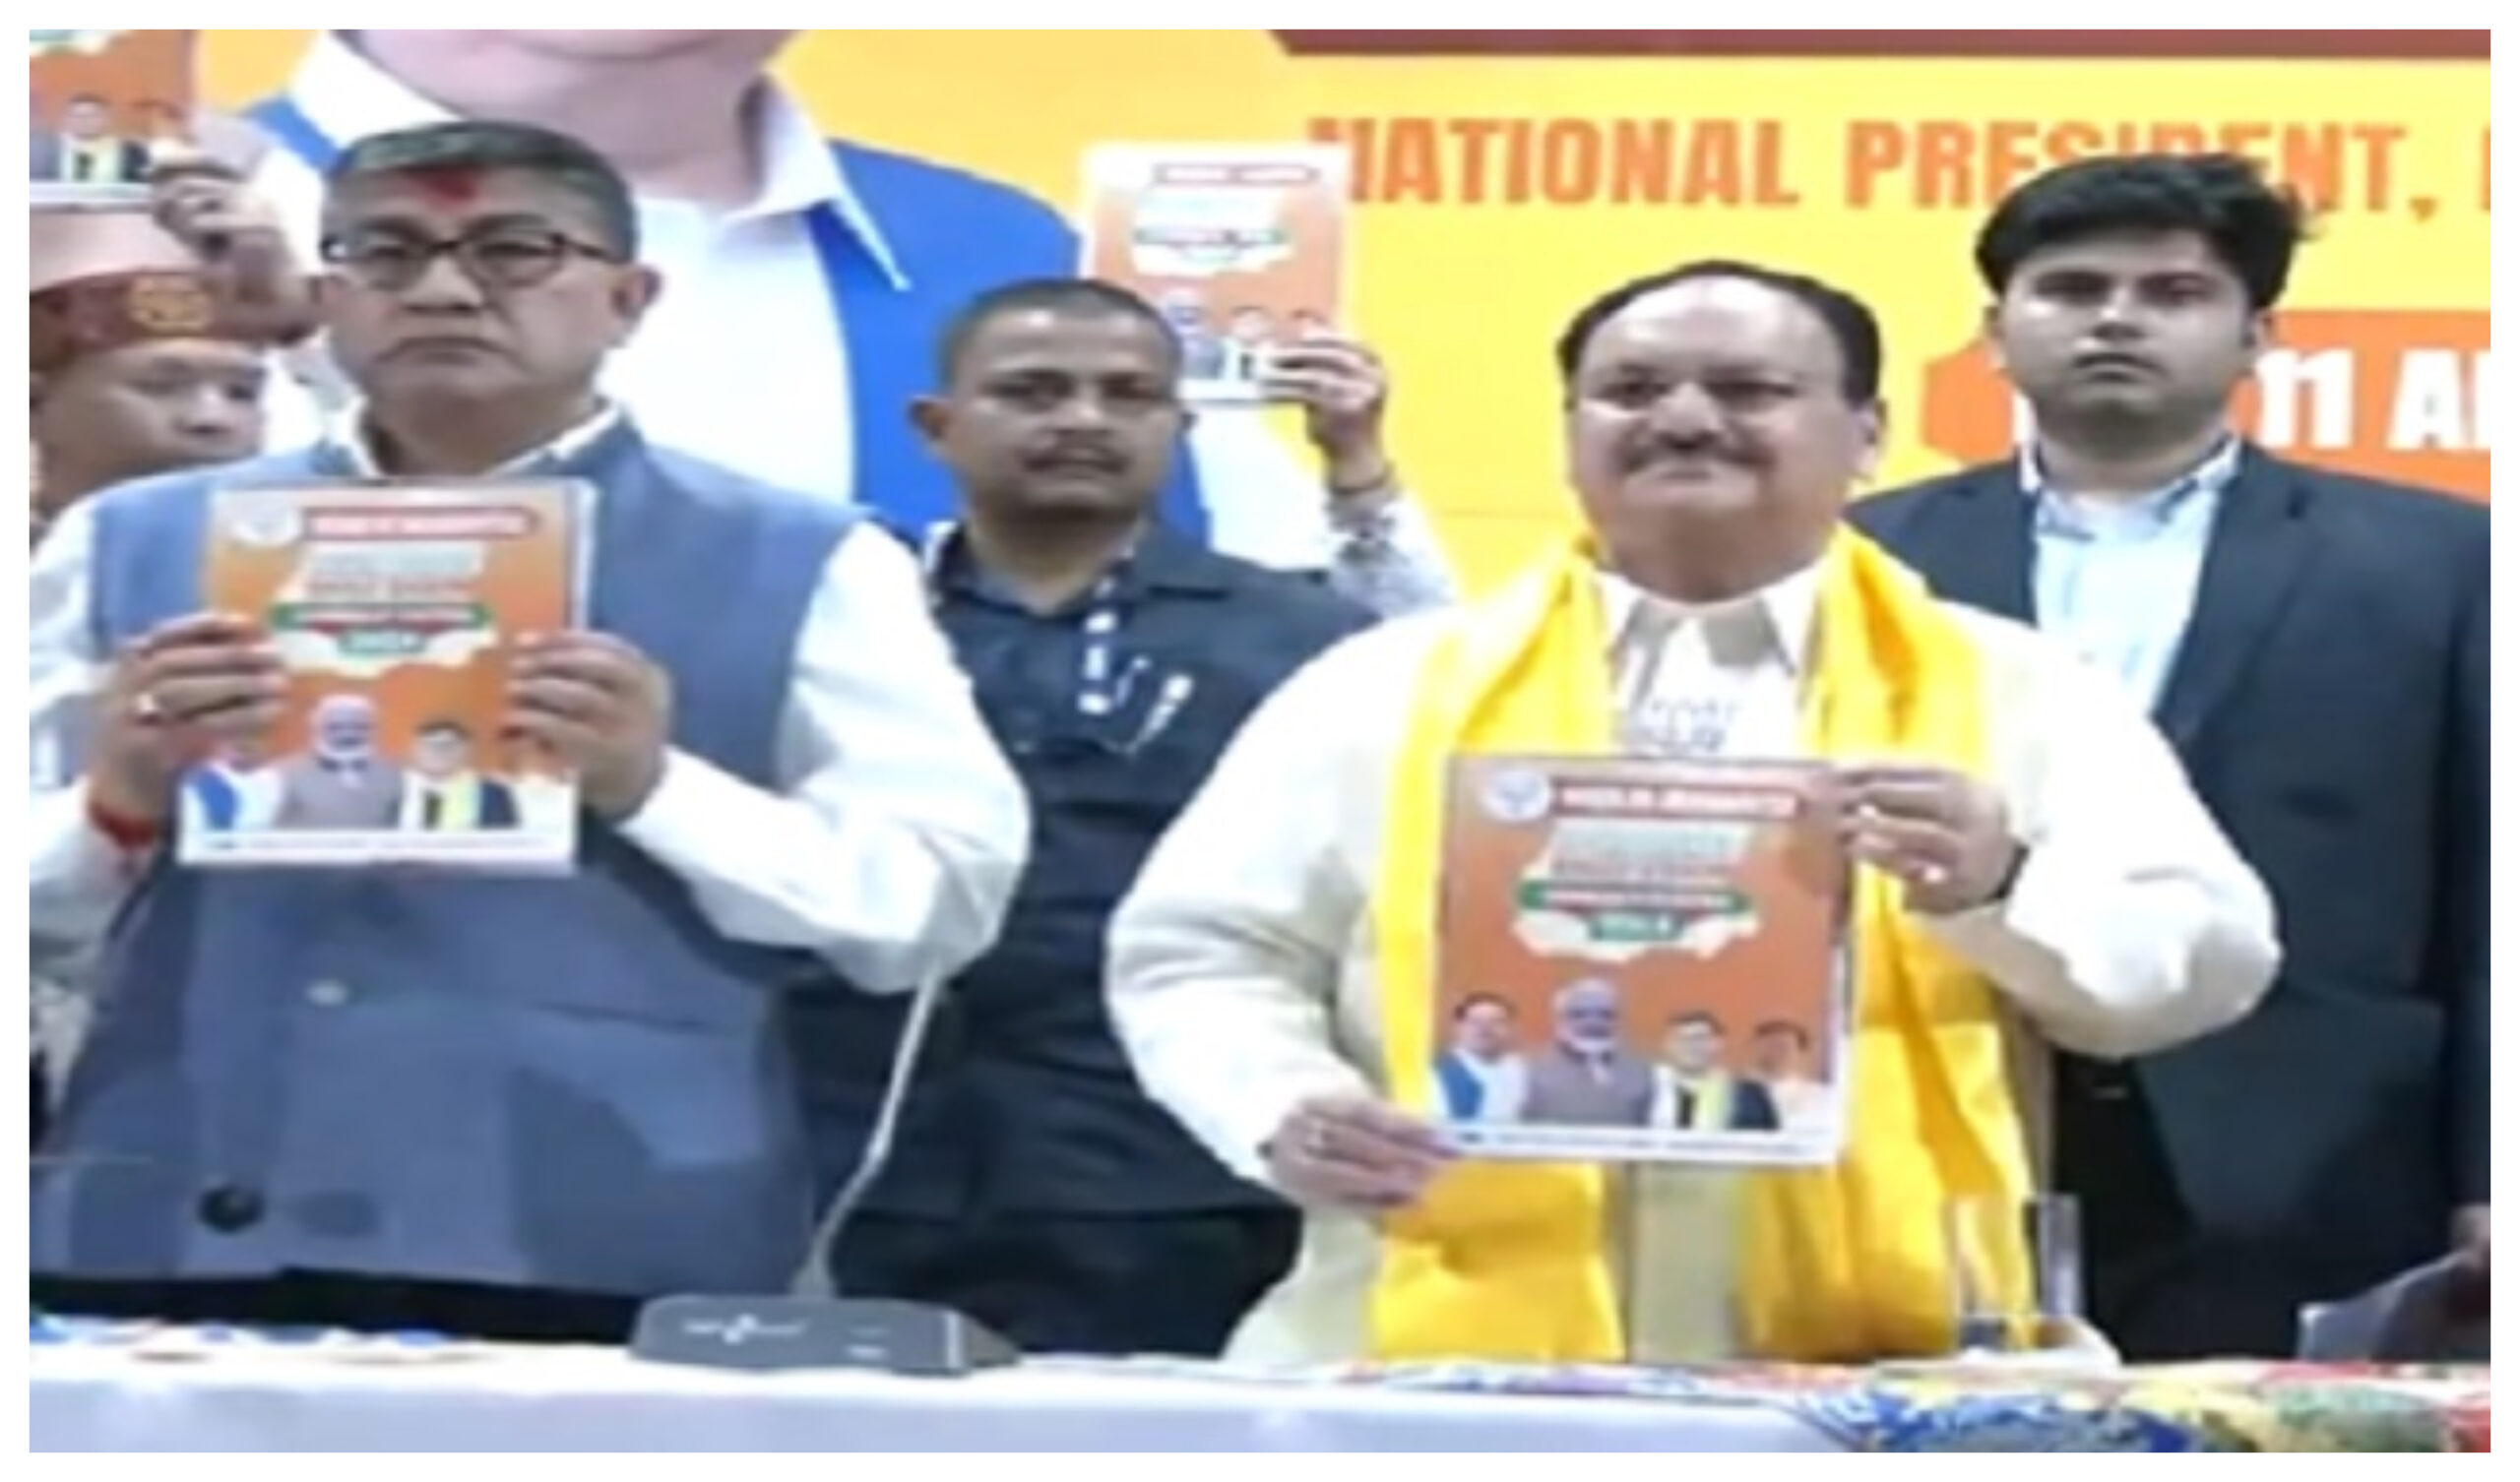 sikkim-bjps-manifesto-released-for-assembly-elections-promises-to-maintain-the-spirit-of-article-371f-bjp-release-manifesto-for-sikkim-assembly-election-bjp-bjp-manifesto-sikkim-assembly-elect